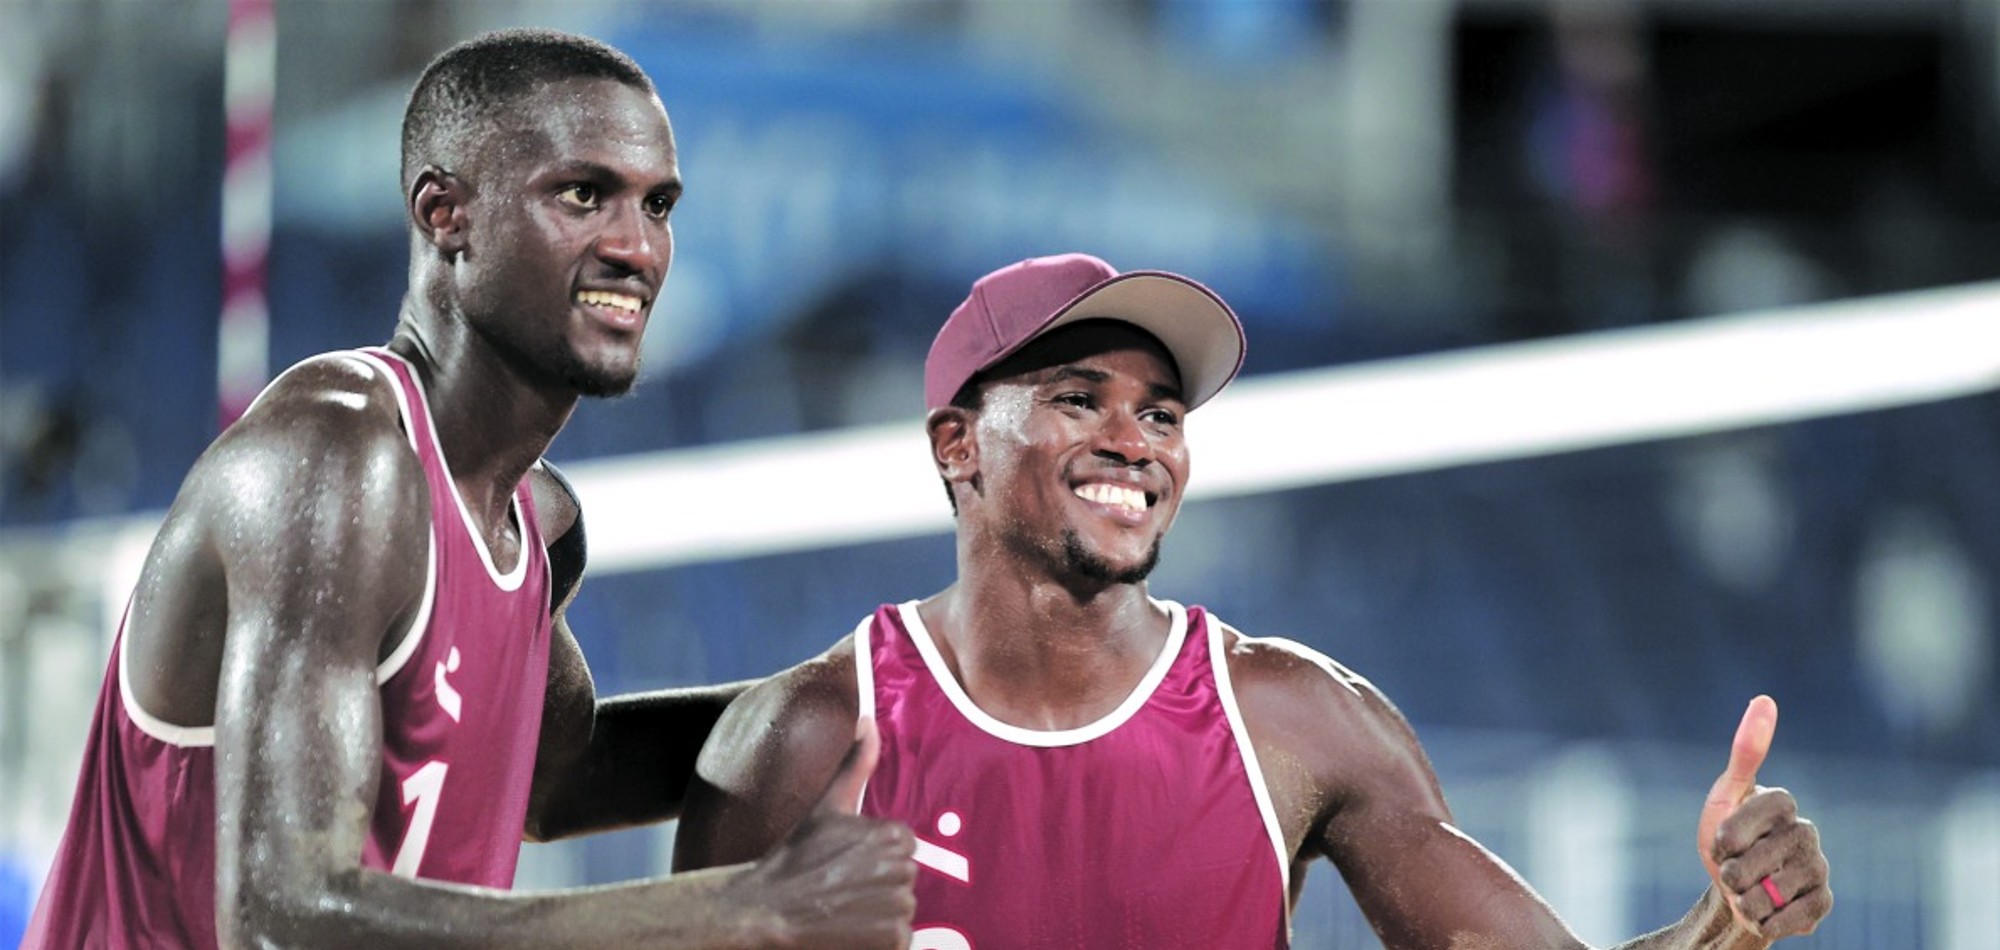 World Beach Volleyball Pro Tour: Cherif and Tijan storm into final